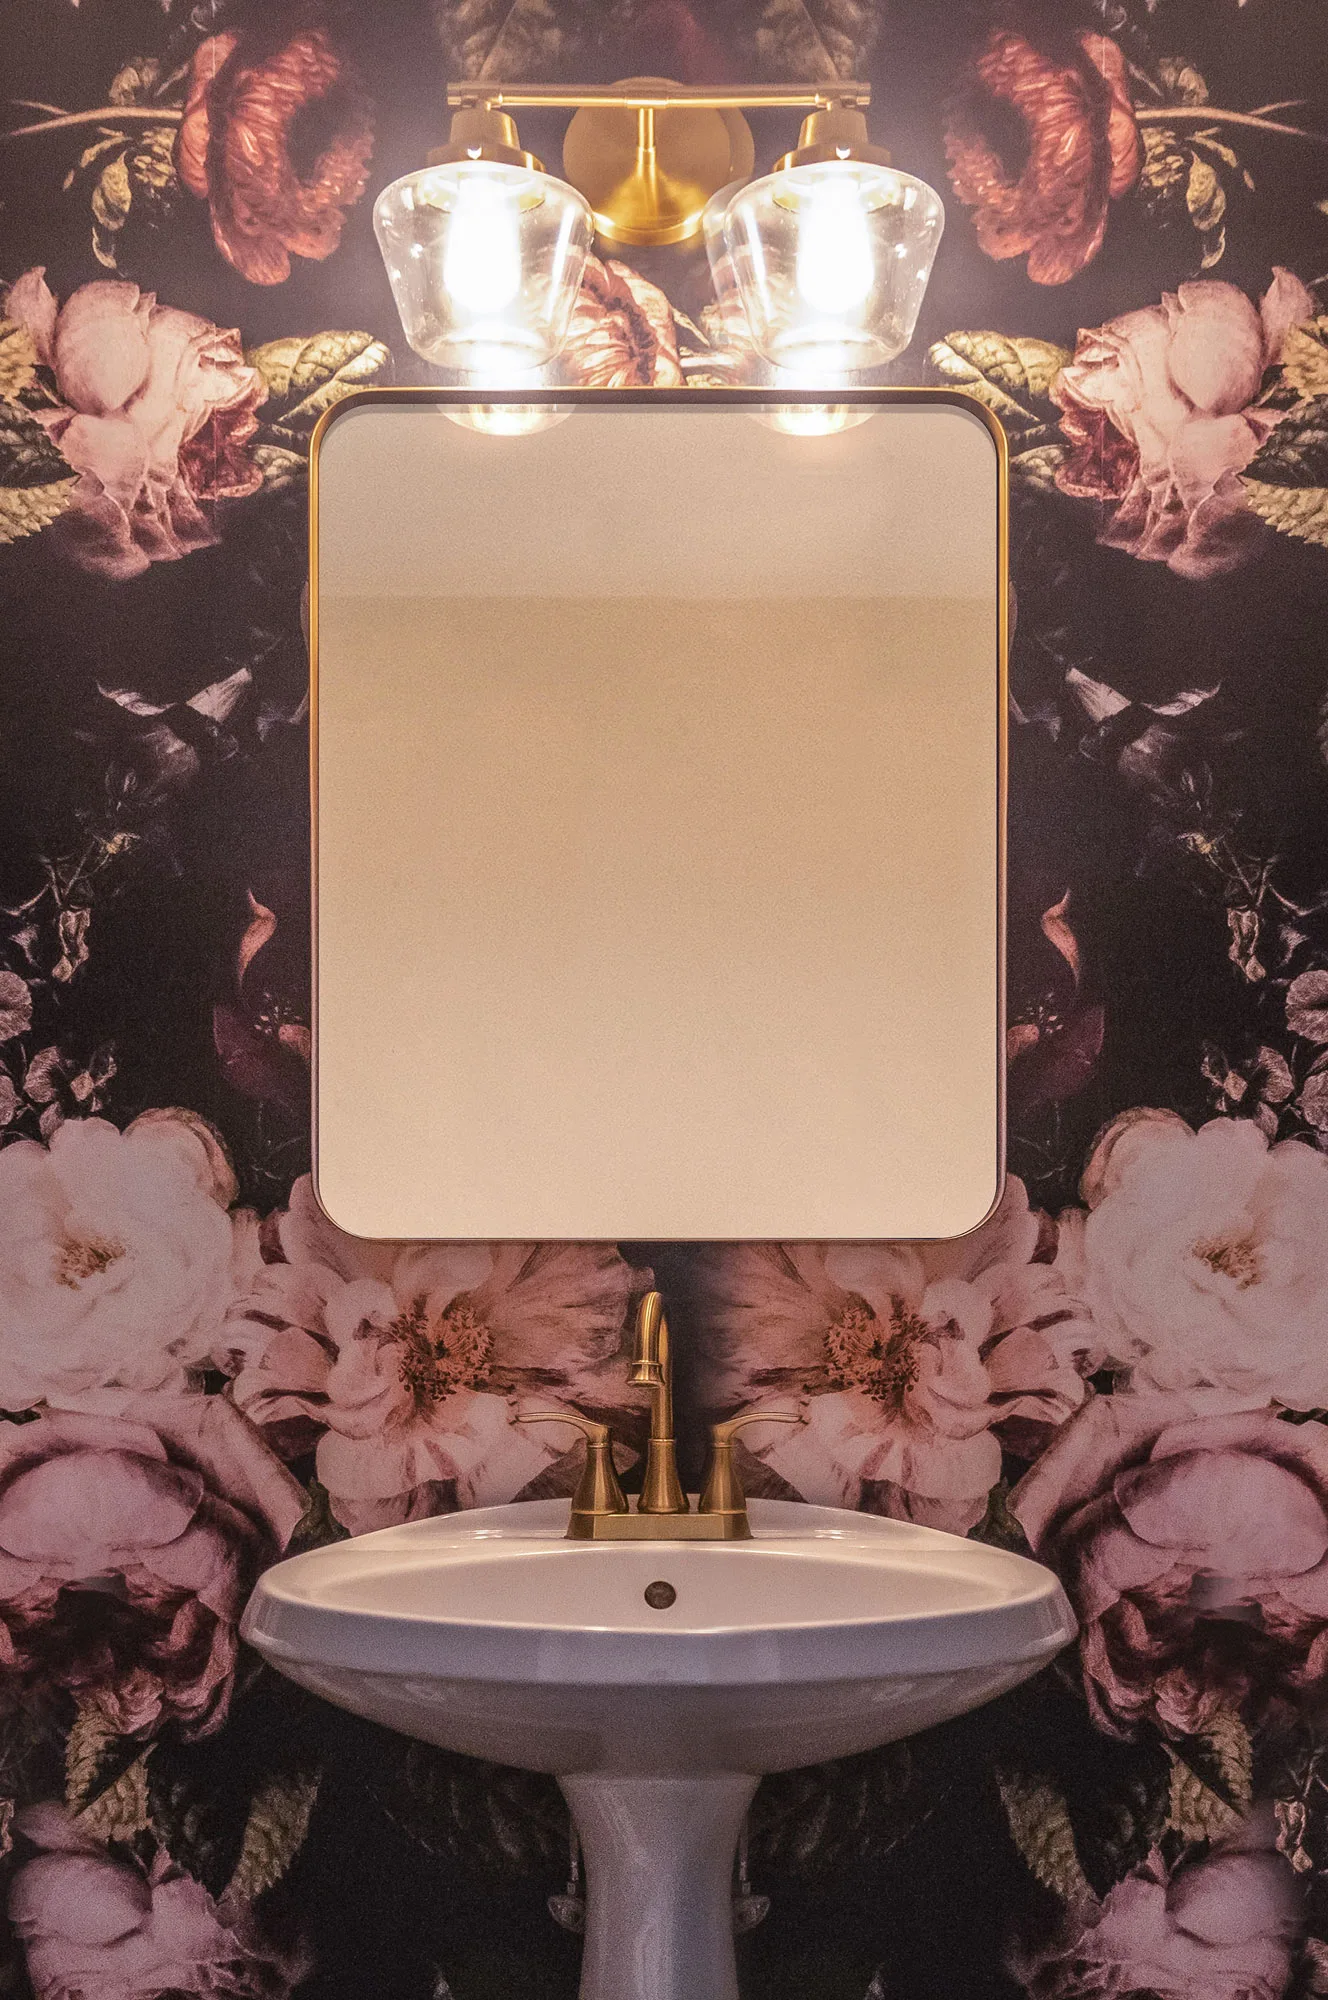 A close up of a pedastal sink and a rounded gold trimmed mirror with large pink floral wallpaper